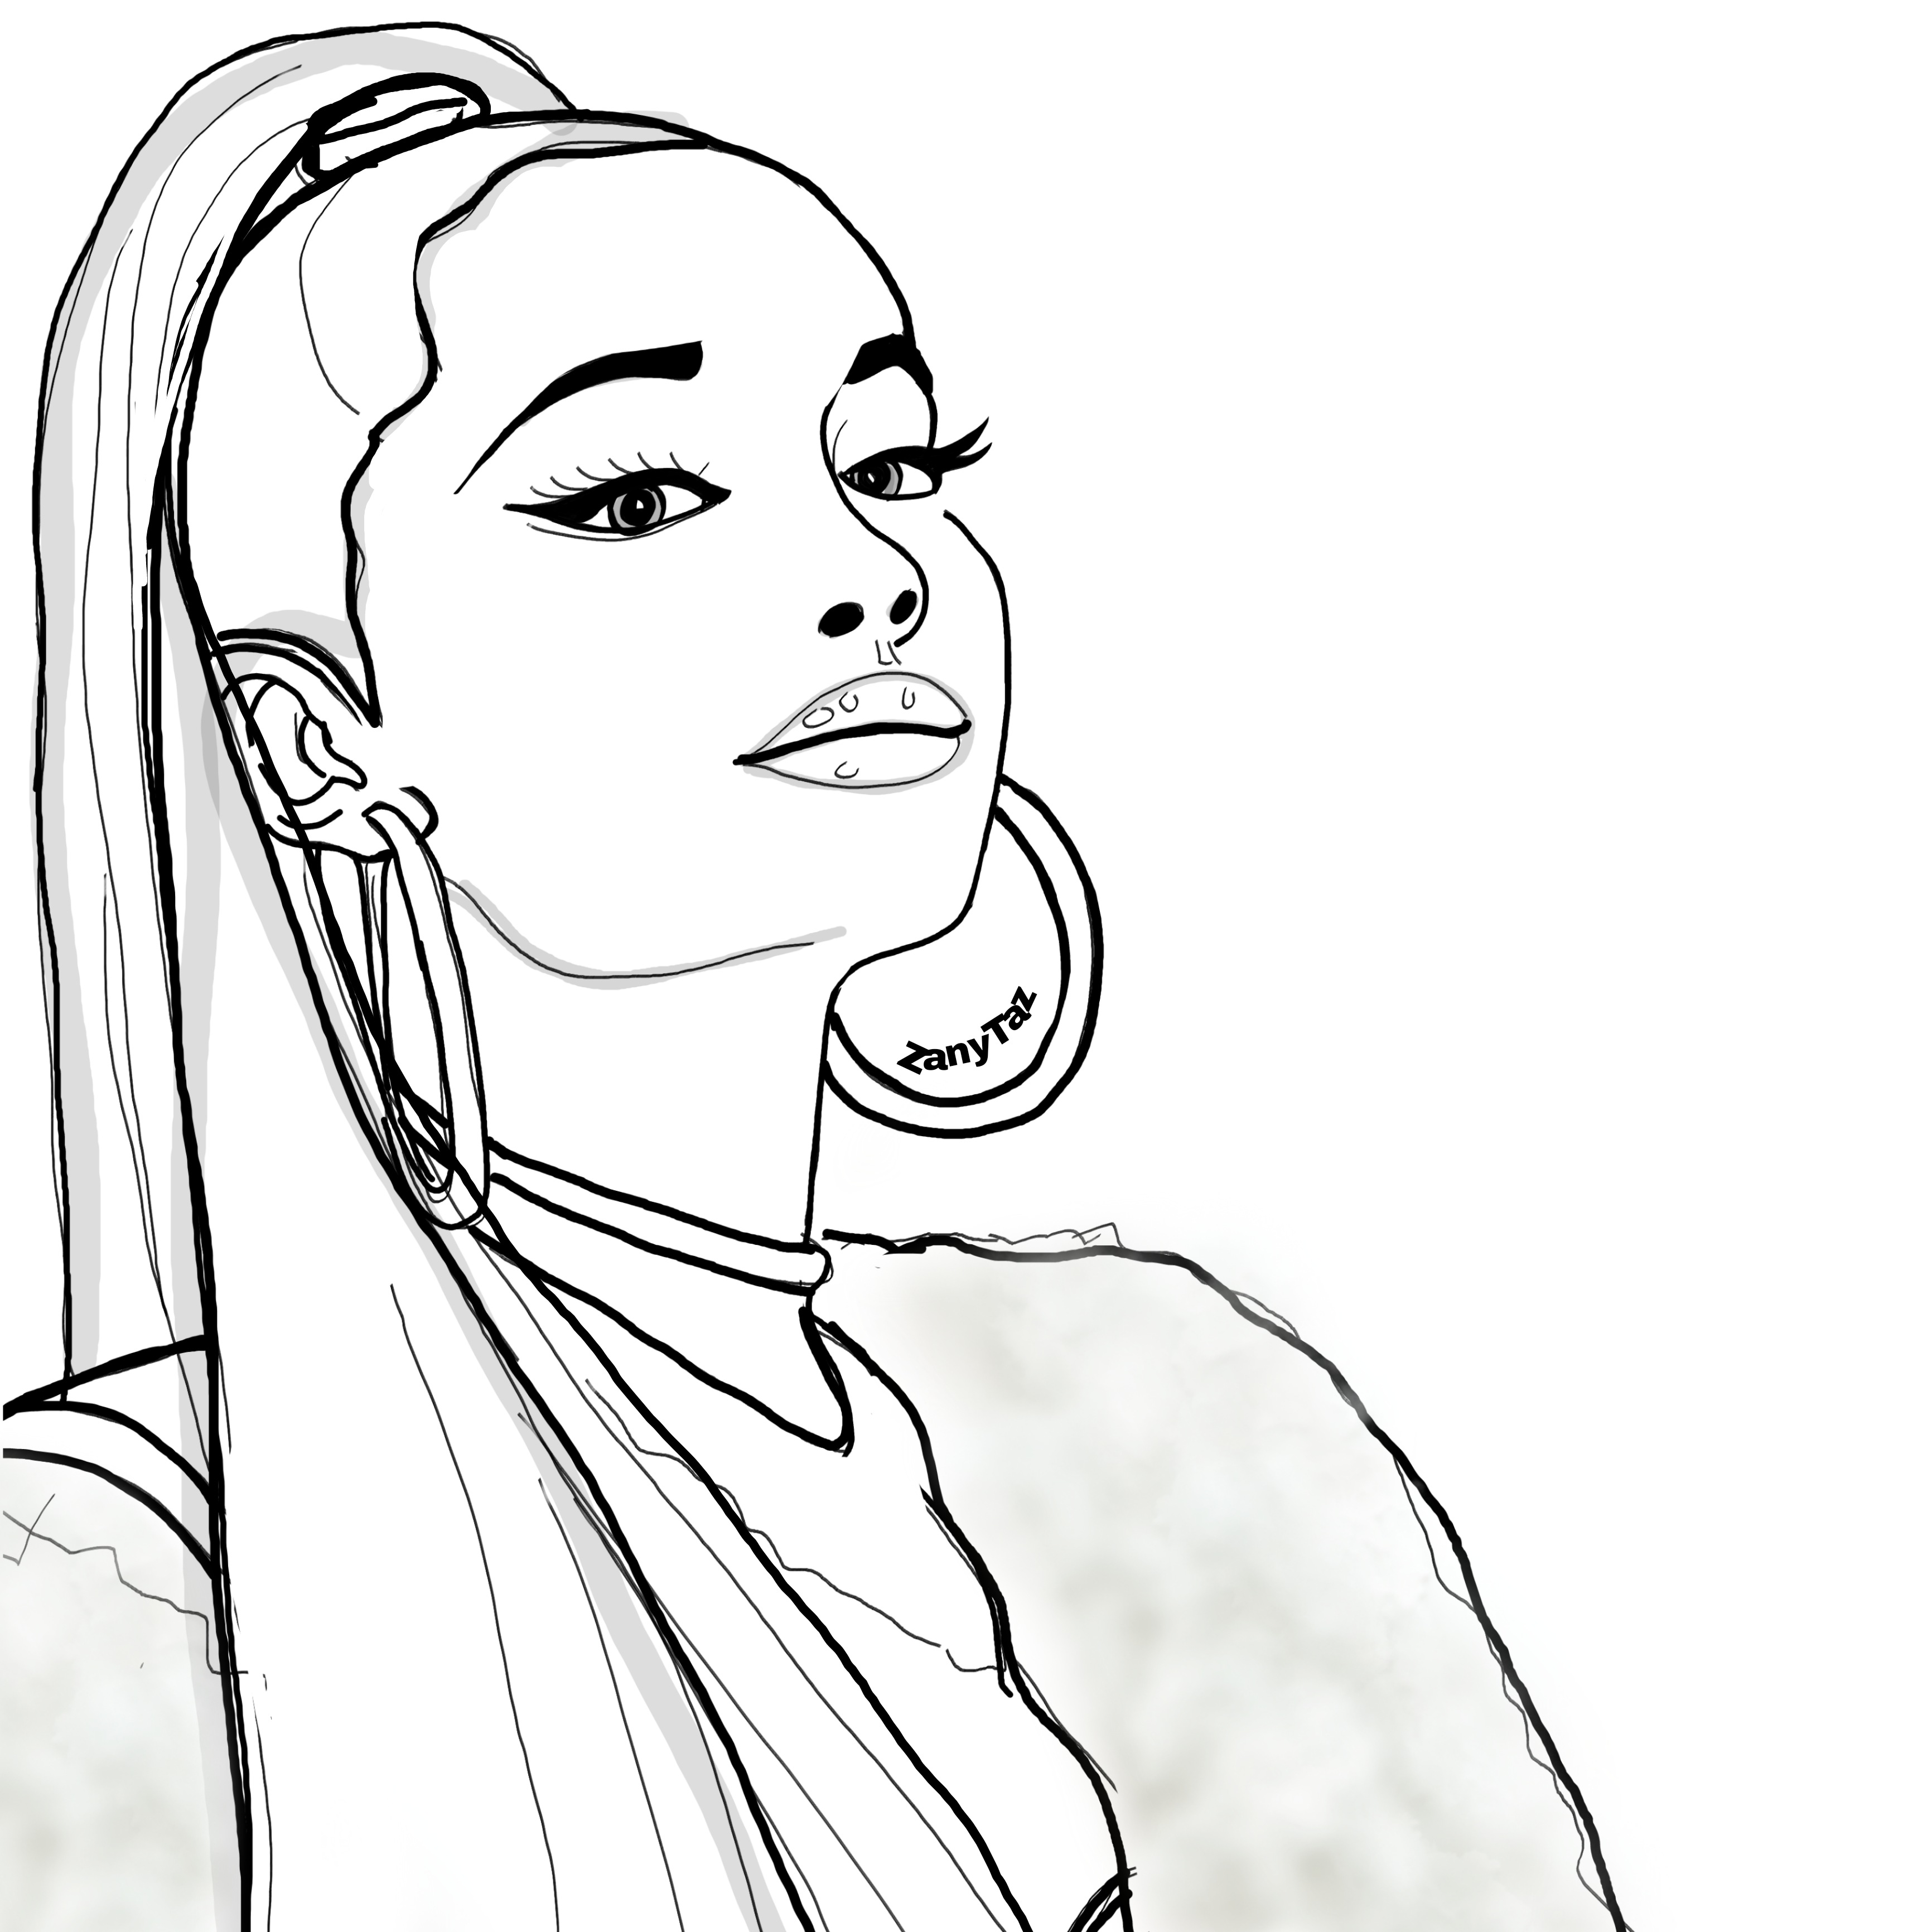 arianagrande linedrawing colorpage image by @draw_art_4u